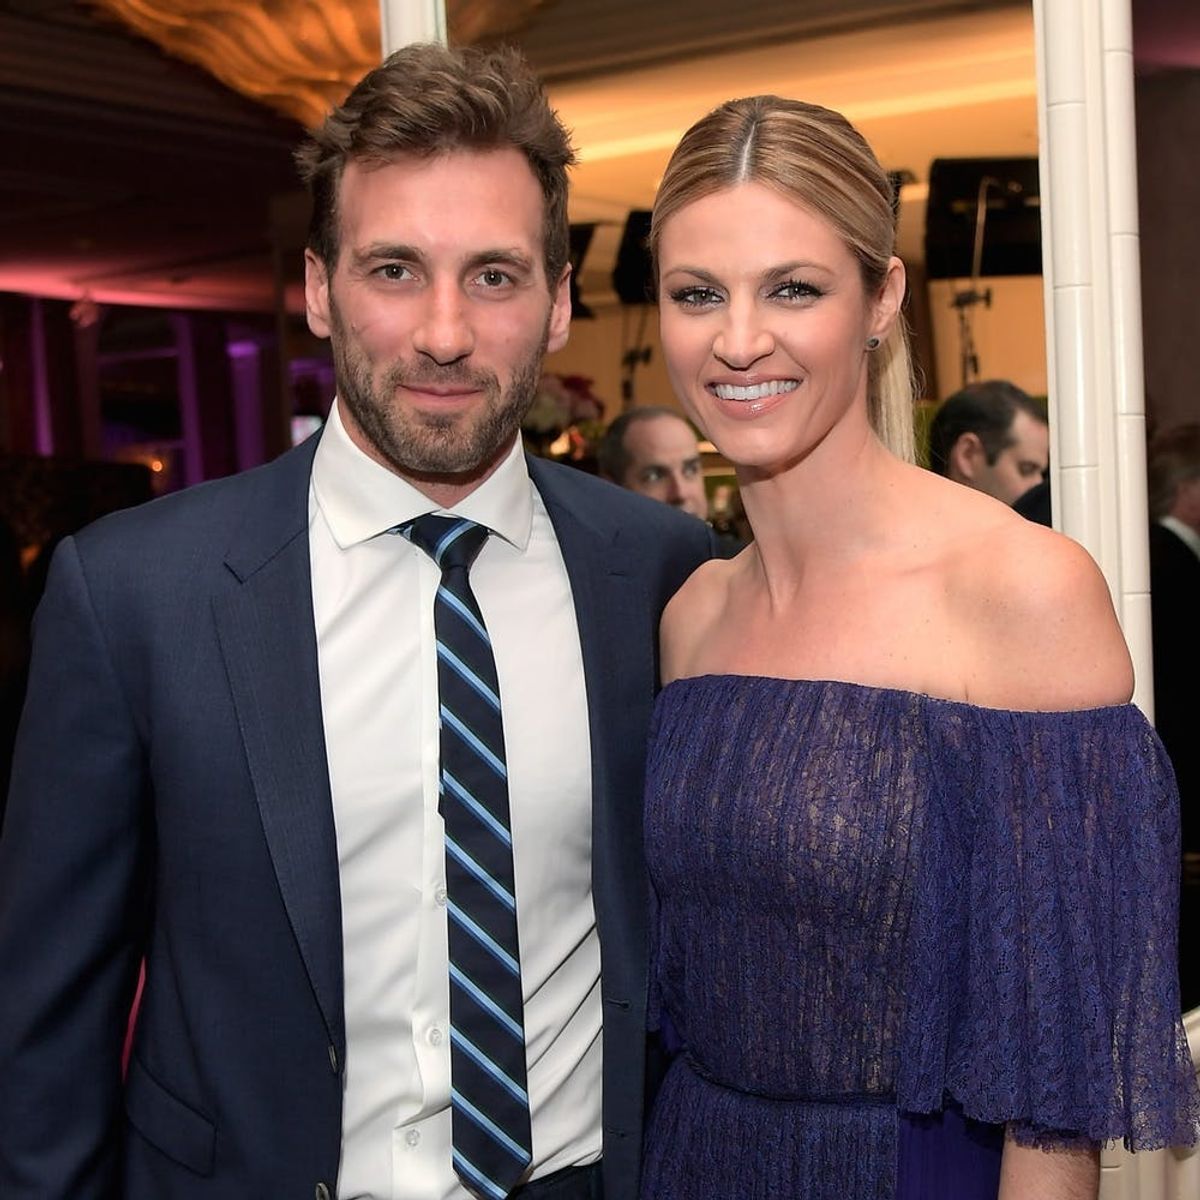 Erin Andrews Tied the Knot With Jarret Stoll in a Dreamy Sunset Mountaintop Ceremony